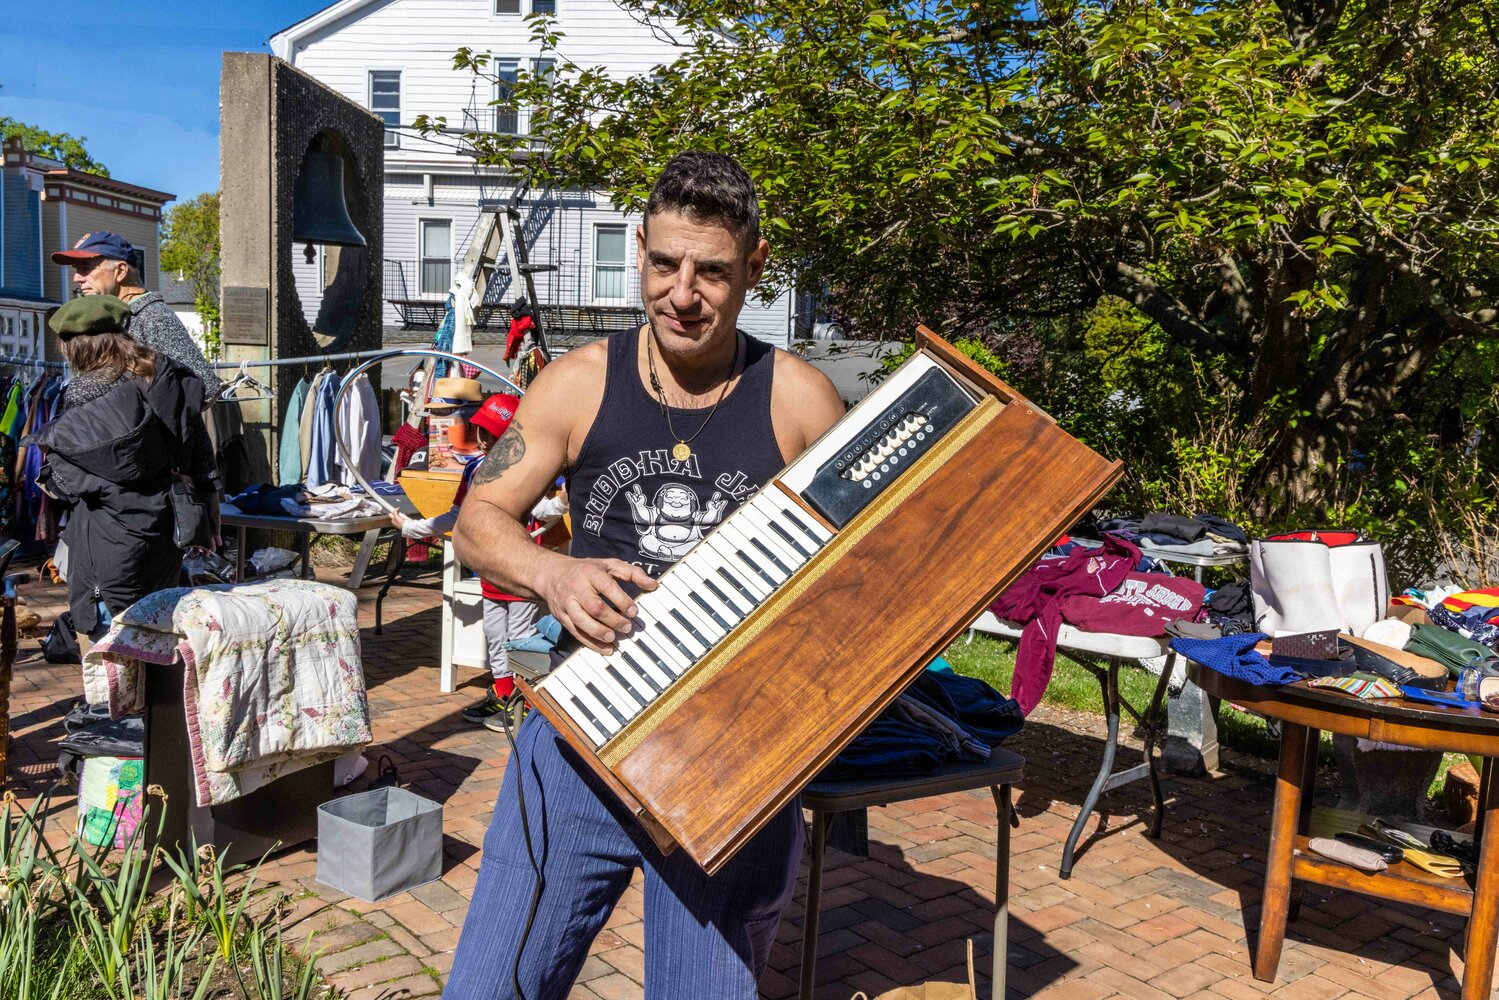 People never know what they’ll find at Offbeat Artifacts. After finding a keyboard to buy on May 6, Jason Samel can consider starting a band.